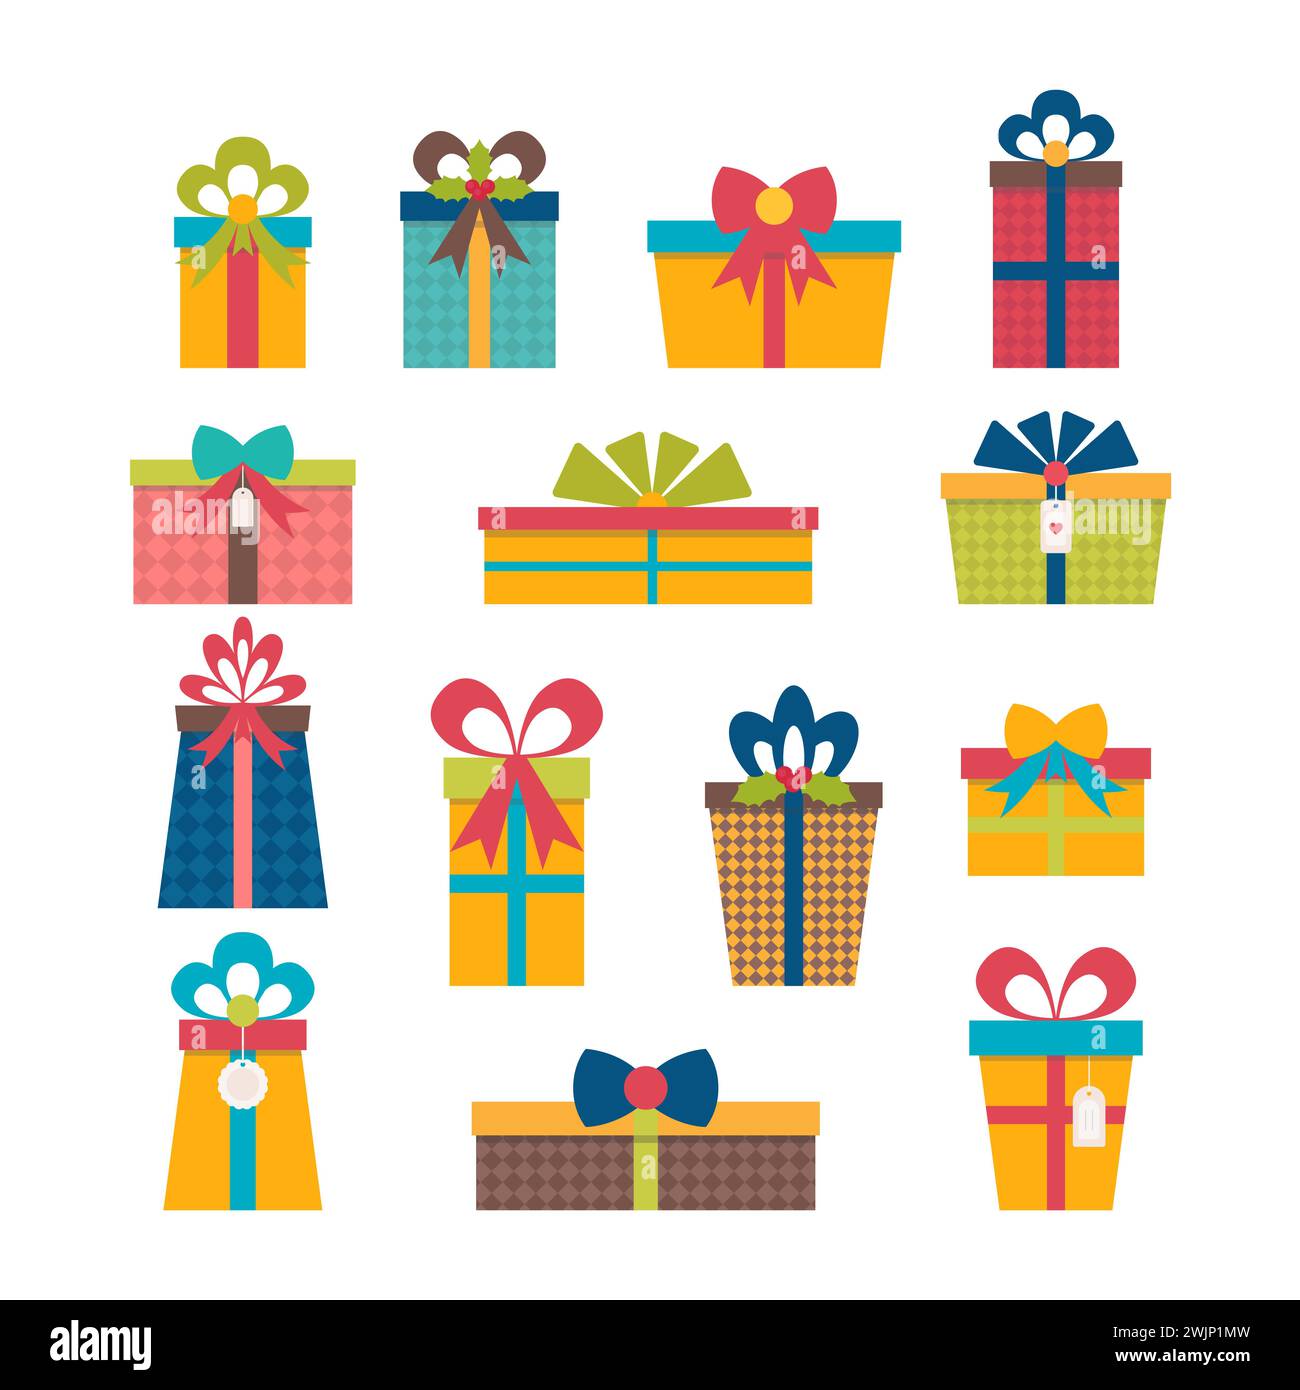 Set of different gift boxes. Flat design. Colorful wrapped gift boxes. Birthday surprise. Christmas presents. Vector illustration Stock Vector